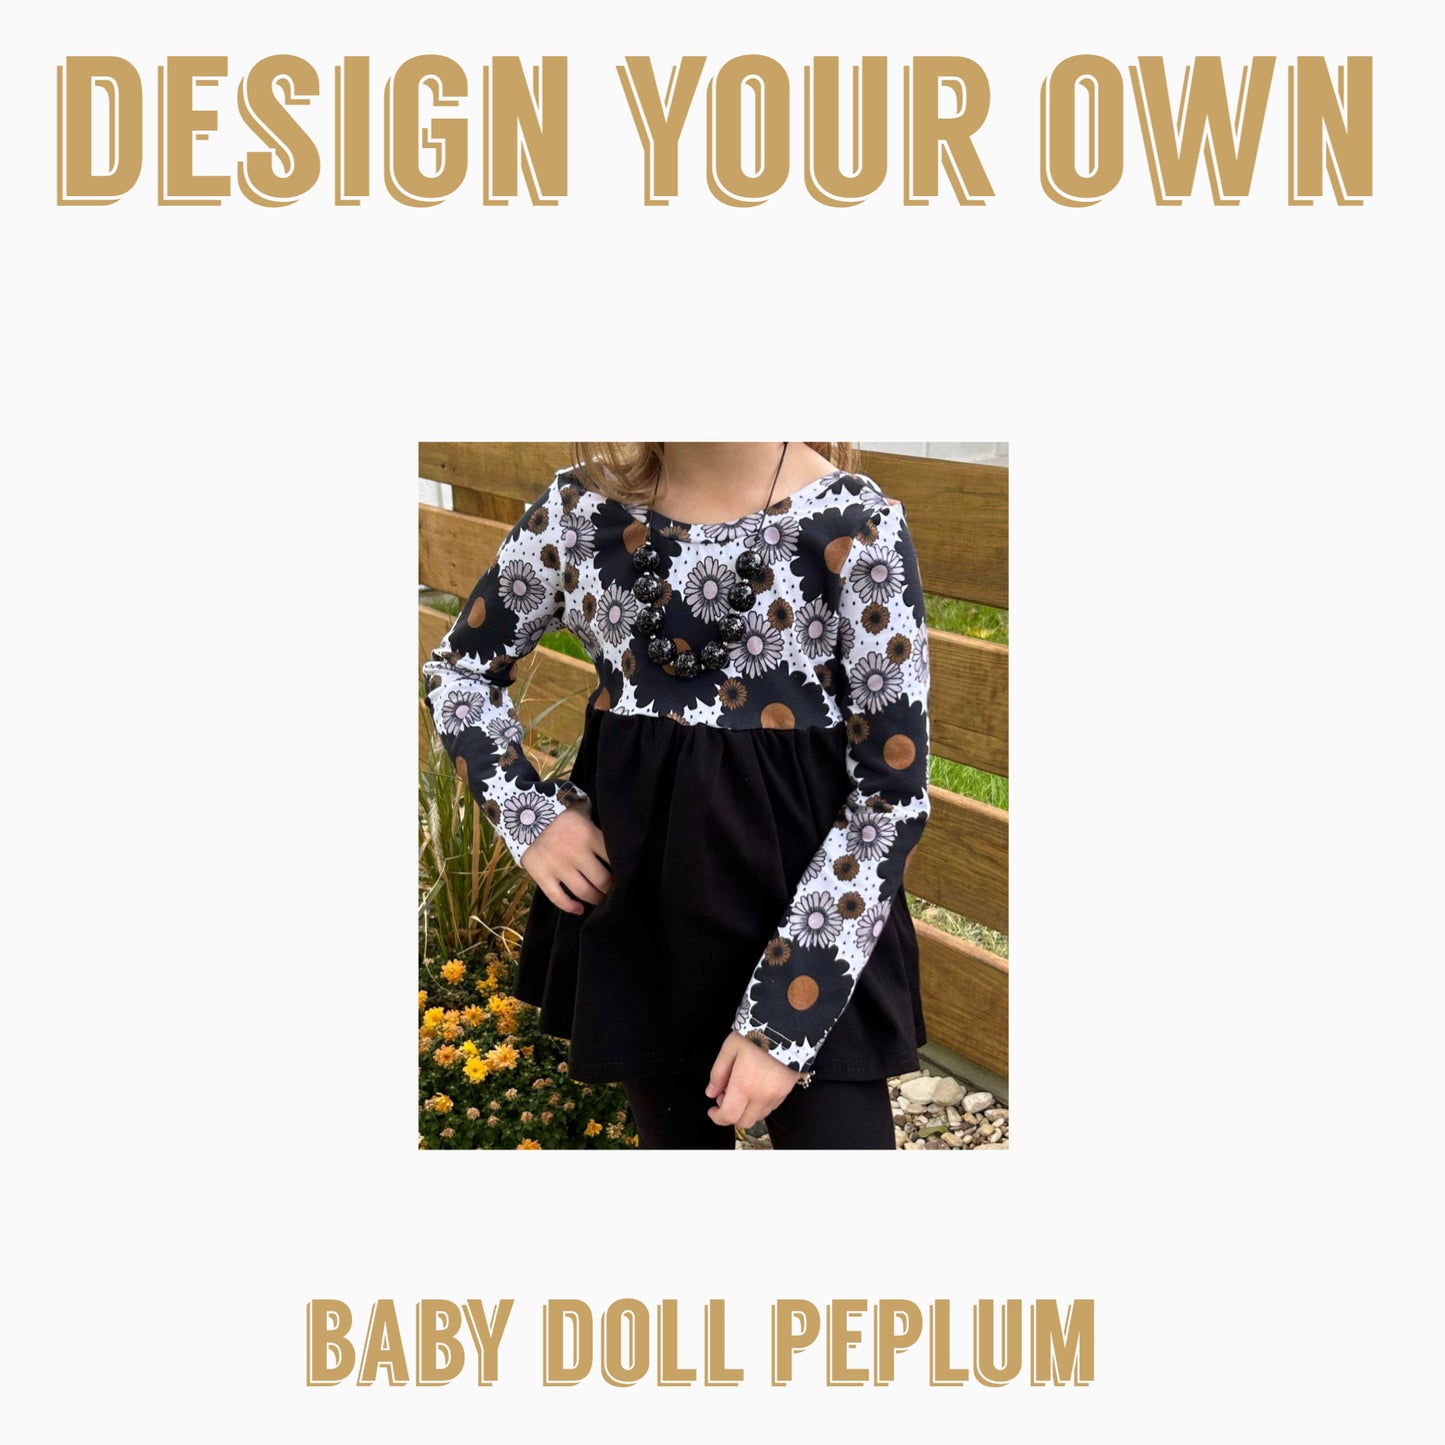 Design your own | Baby Doll Peplum